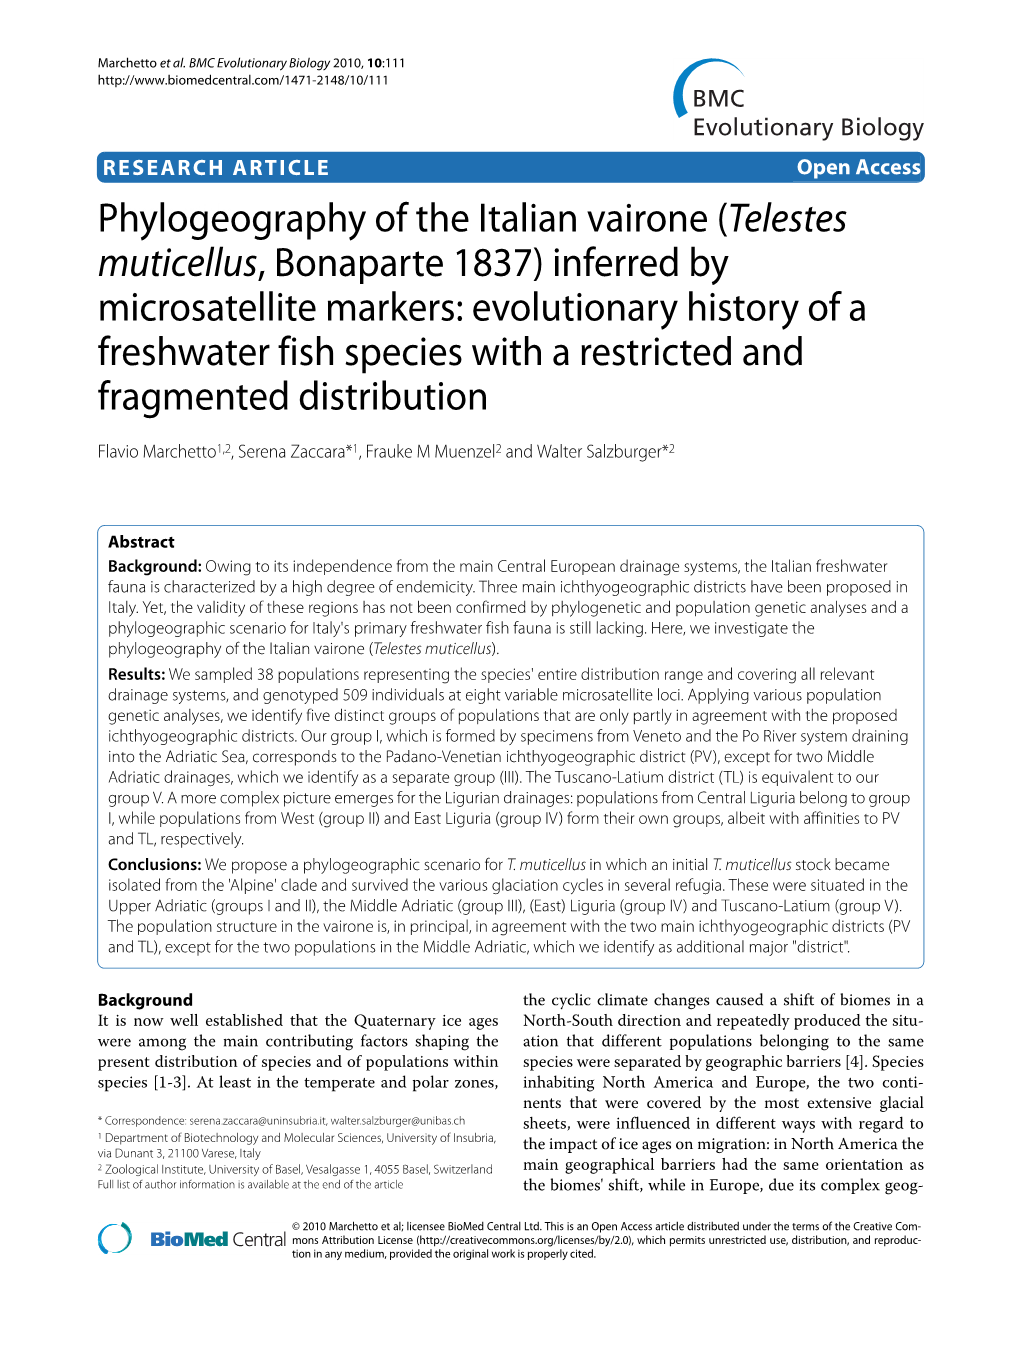 Inferred by Microsatellite Markers: Evolutionary History of a Freshwater Fish Species with a Restricted and Fragmented Distribution